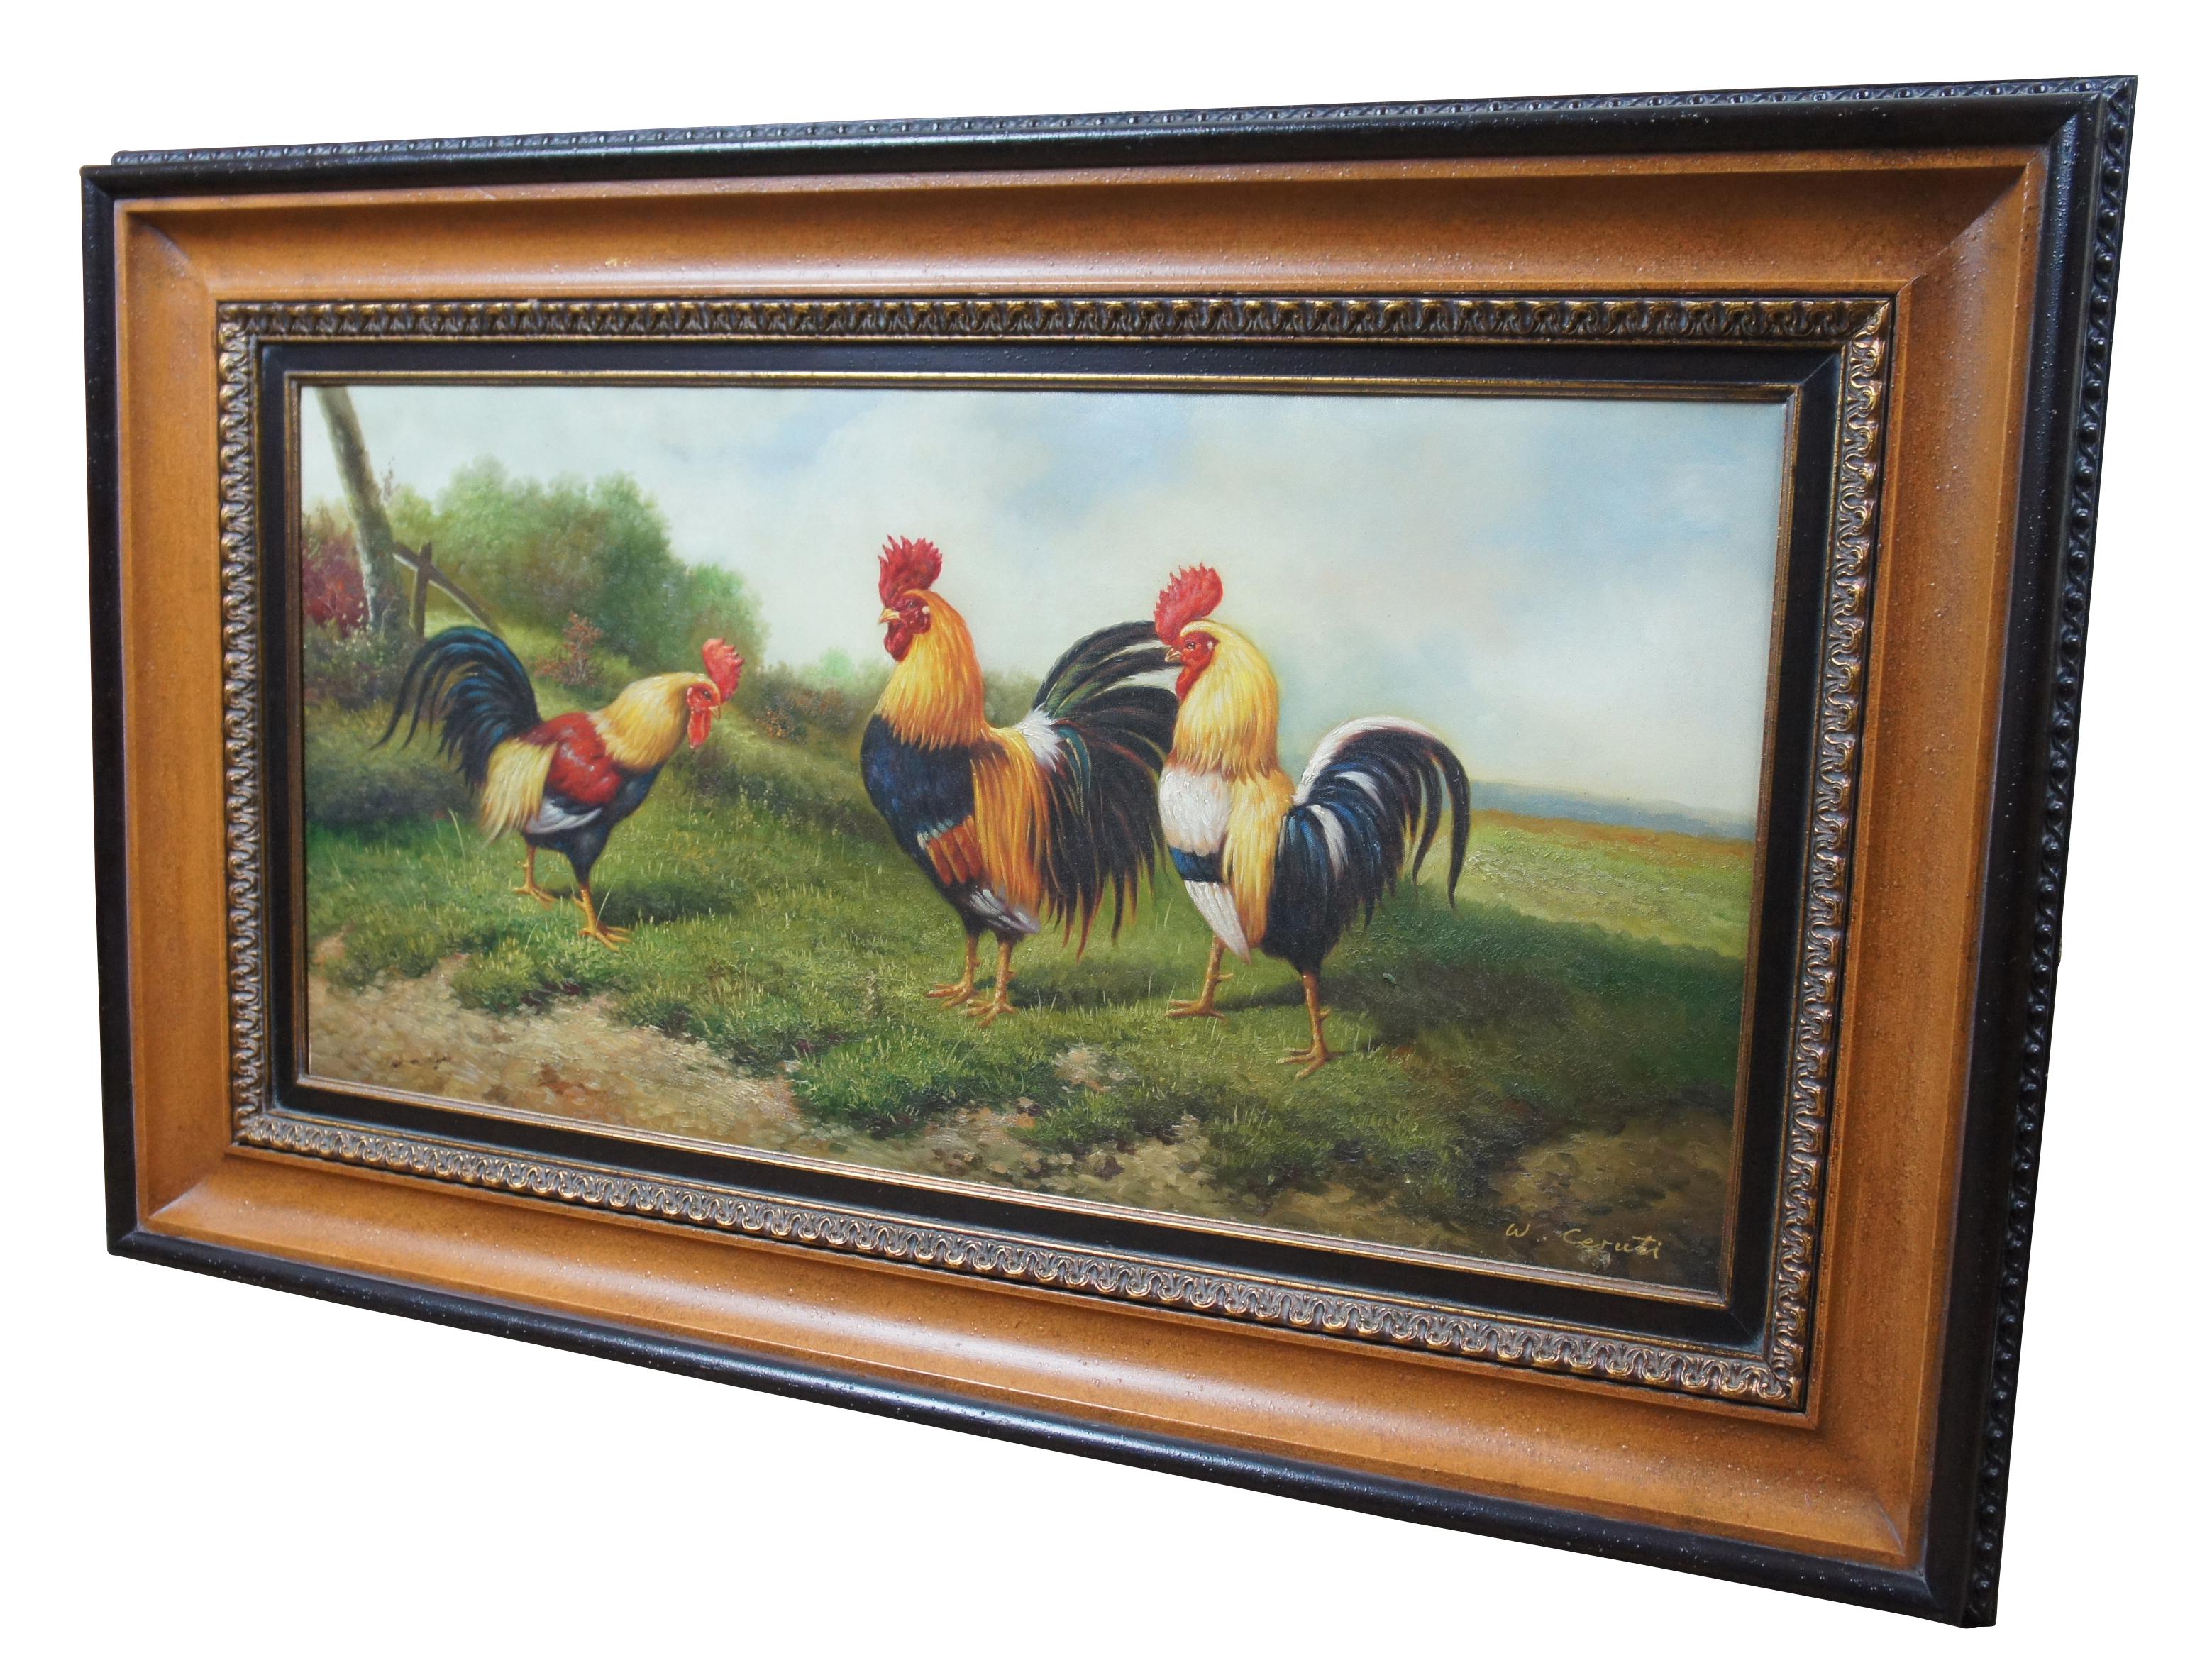 Large oil painting on canvas signed by W. Ceruti showing roosters in a grassy landscape. Measures: 47